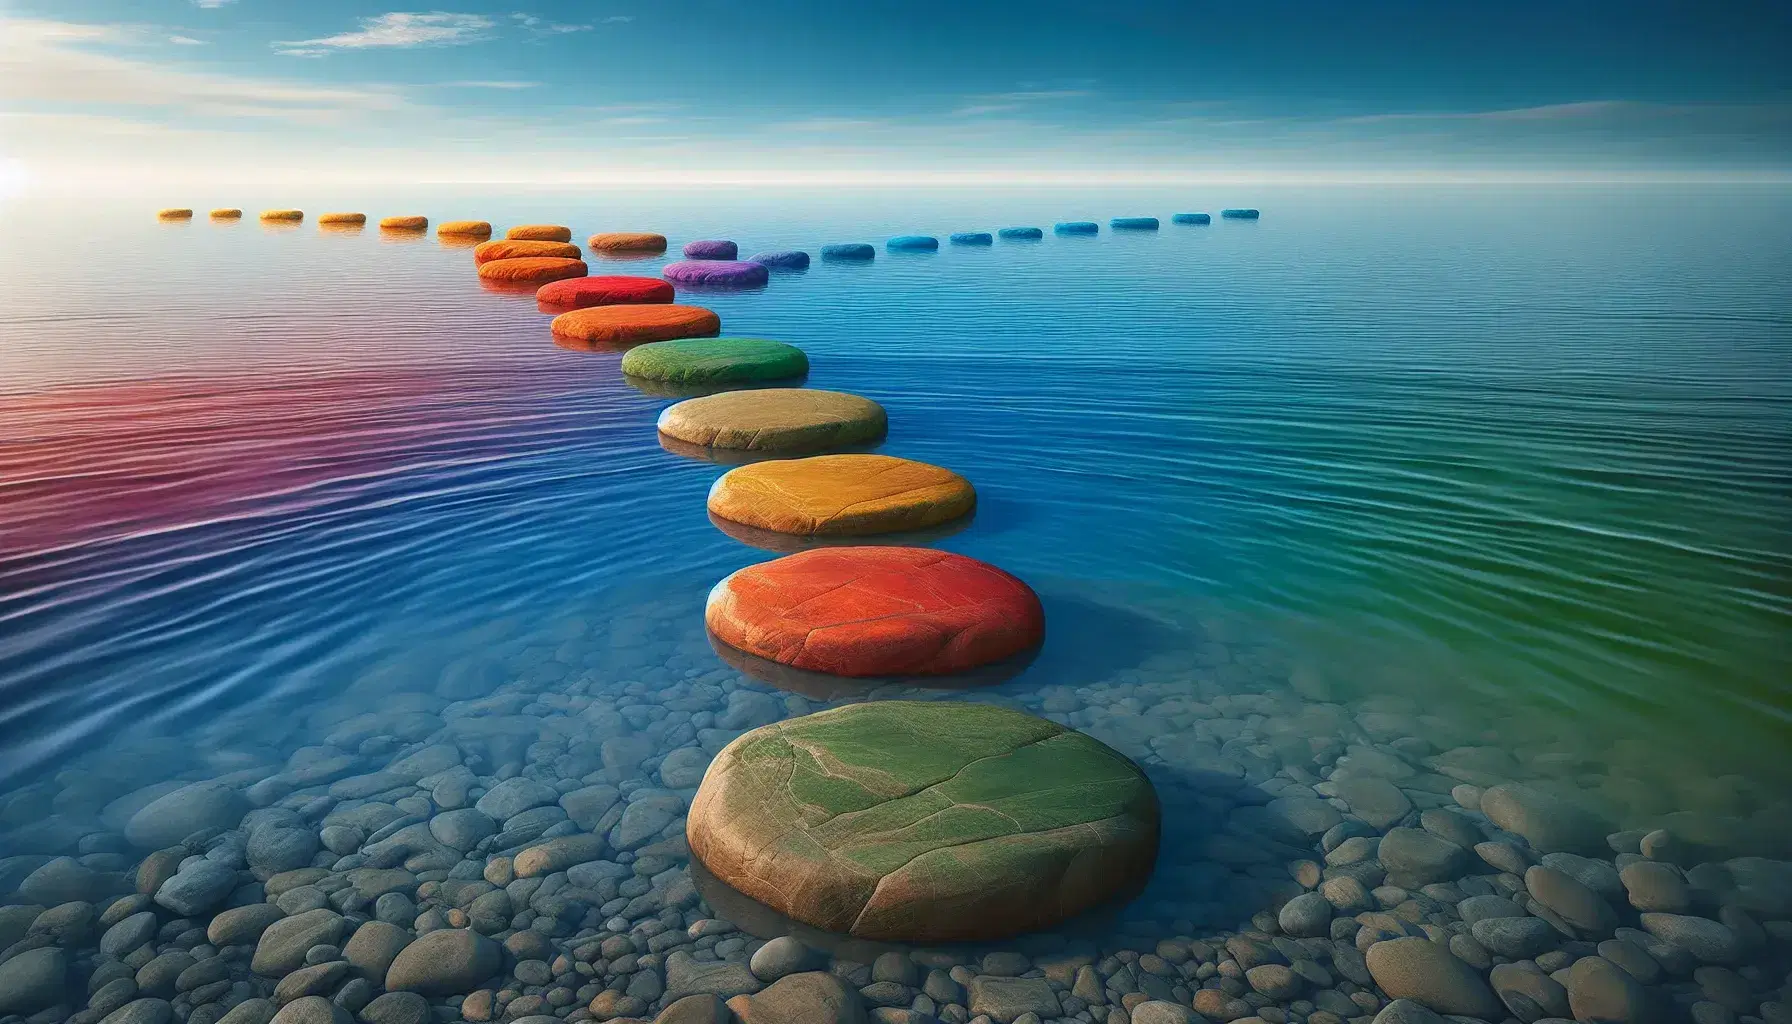 Path of rainbow colored stones crossing calm water with clear sky and vegetation on the sides, peaceful atmosphere.